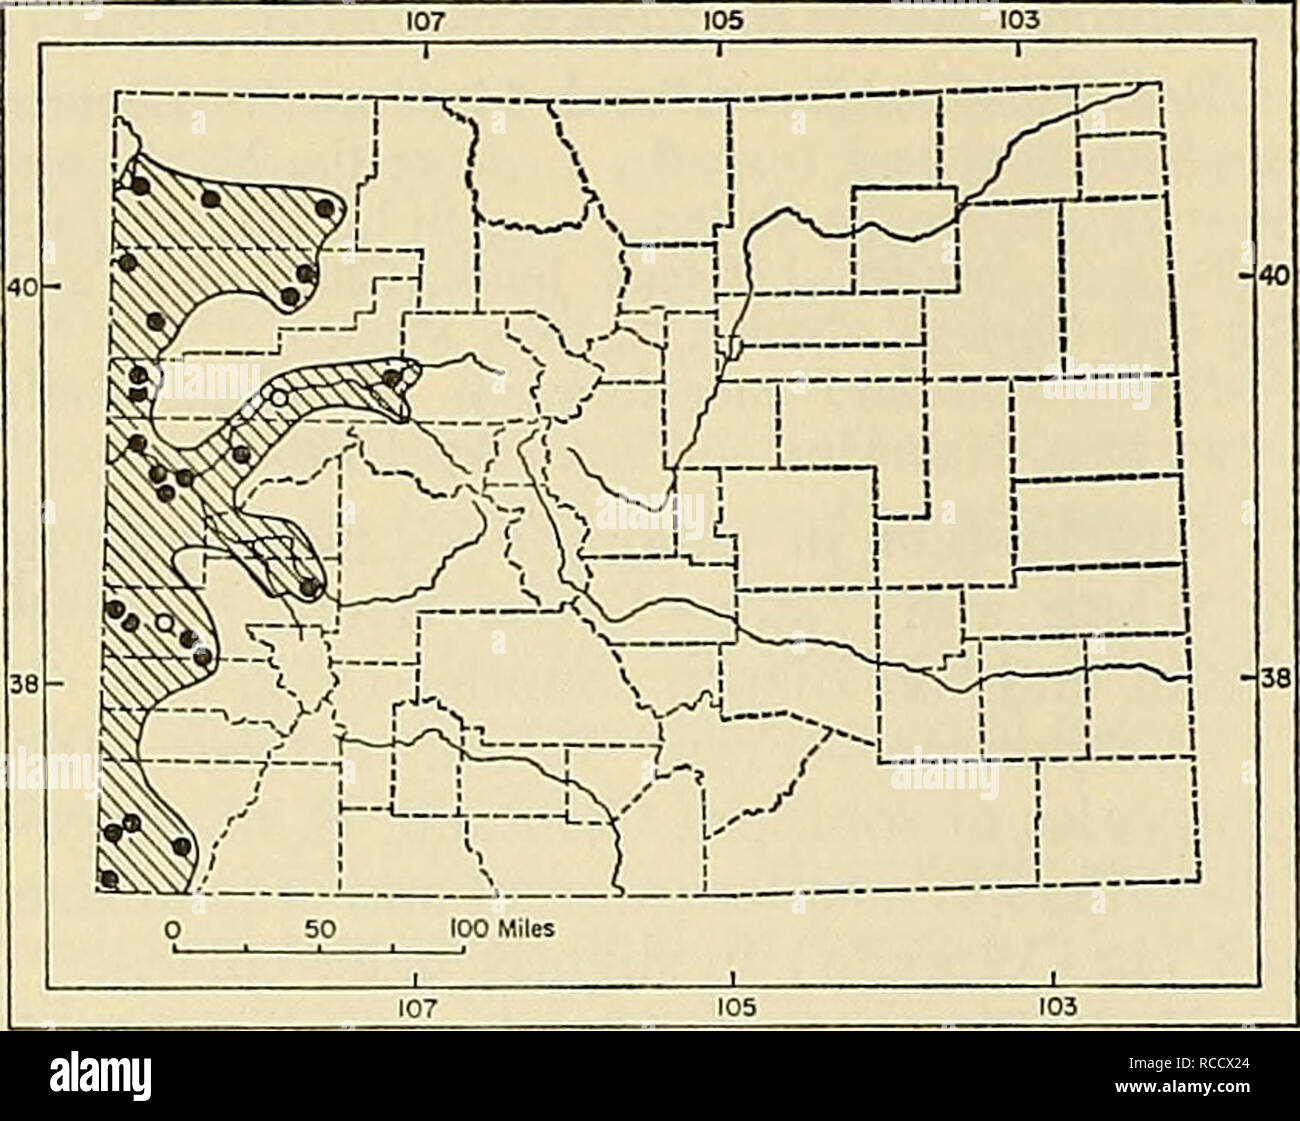 . Distribution of mammals in Colorado. Mammals. 194 MONOGRAPH MUSEUM OF NATURAL HISTORY NO. 3. Fig. 66. Distribution of Peromyscus crinitus auri- pectus in Colorado. For explanation of symbols, see p. 9. elevations up to about 8000 feet. Little is known of the natural history of the species in Colorado. Geographic variation in P. crinitus was studied by Hall and Hoffmeister (1942) and by Goin (1944). Brown and Welser (1968) studied serum albumin polymorphisms in canyon mice, including a sample from southwestern Colorado. Peromyscus crinitus auripectus (J. A. Allen) Sitomys auripectus J. A. All Stock Photo